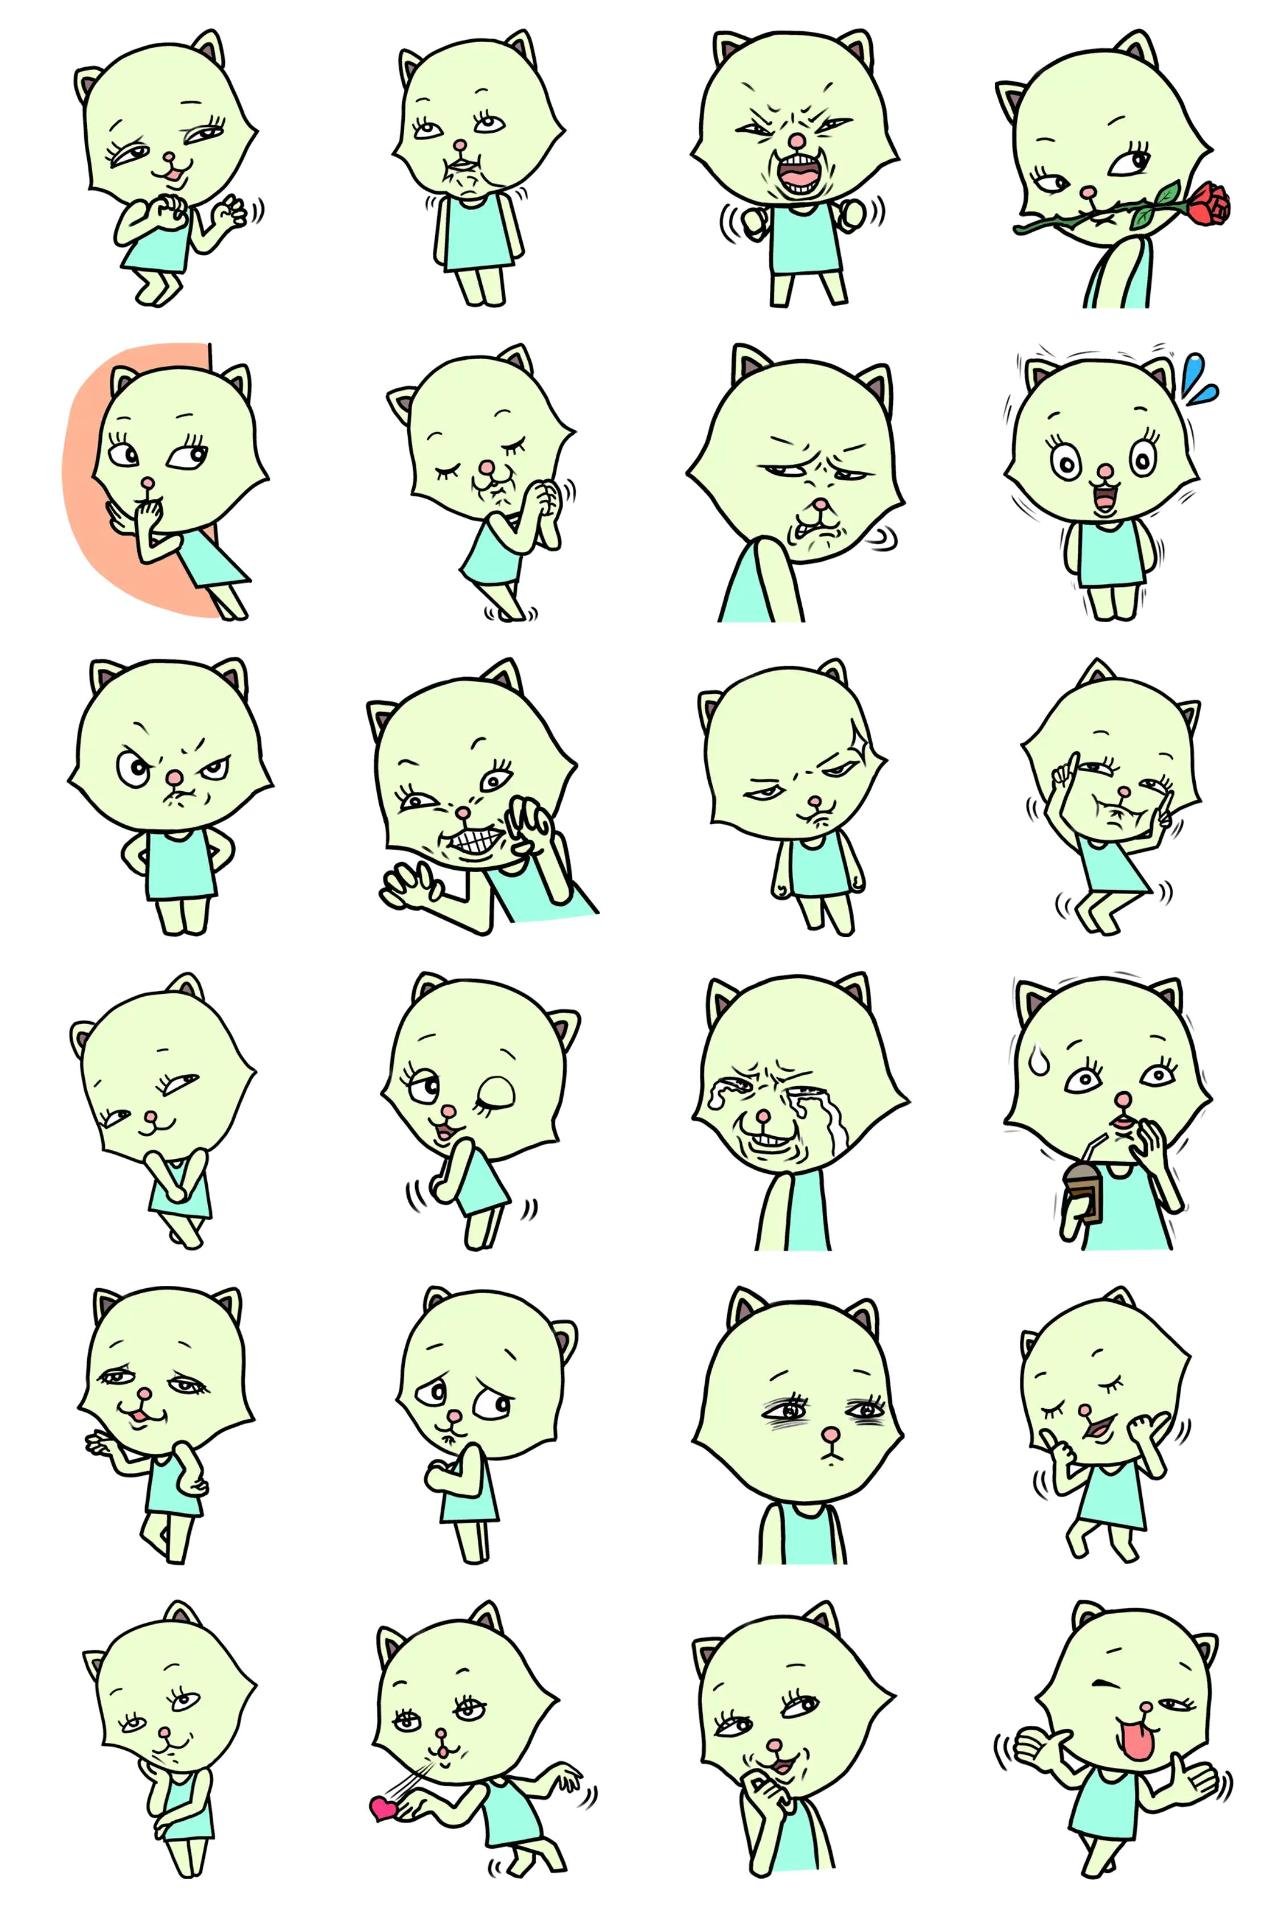 Mint Cat Ong Animals sticker pack for Whatsapp, Telegram, Signal, and others chatting and message apps